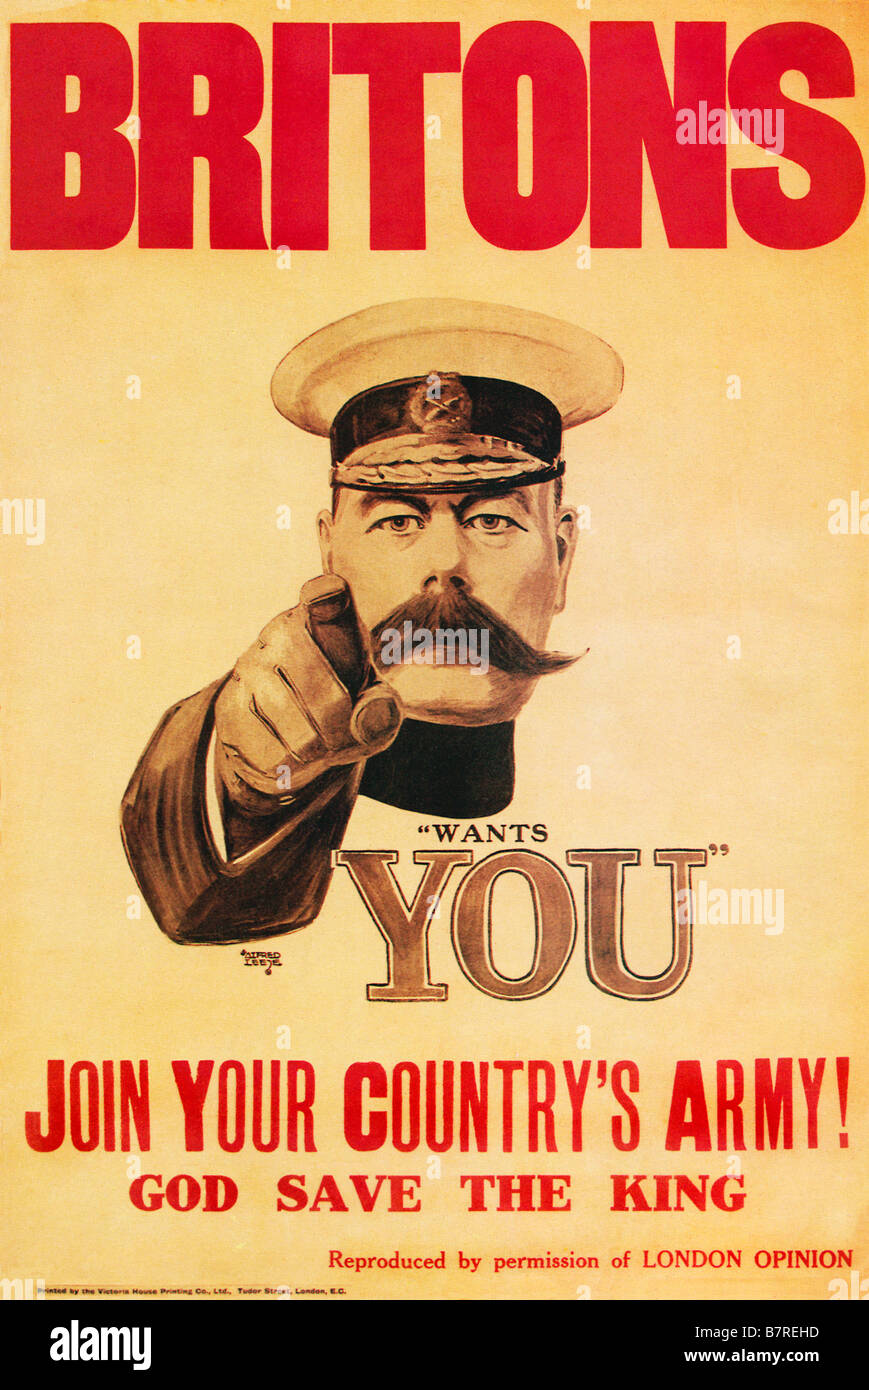 Britons Kitchener Wants You iconic Great War recruiting poster based on the photo by Bassano Stock Photo